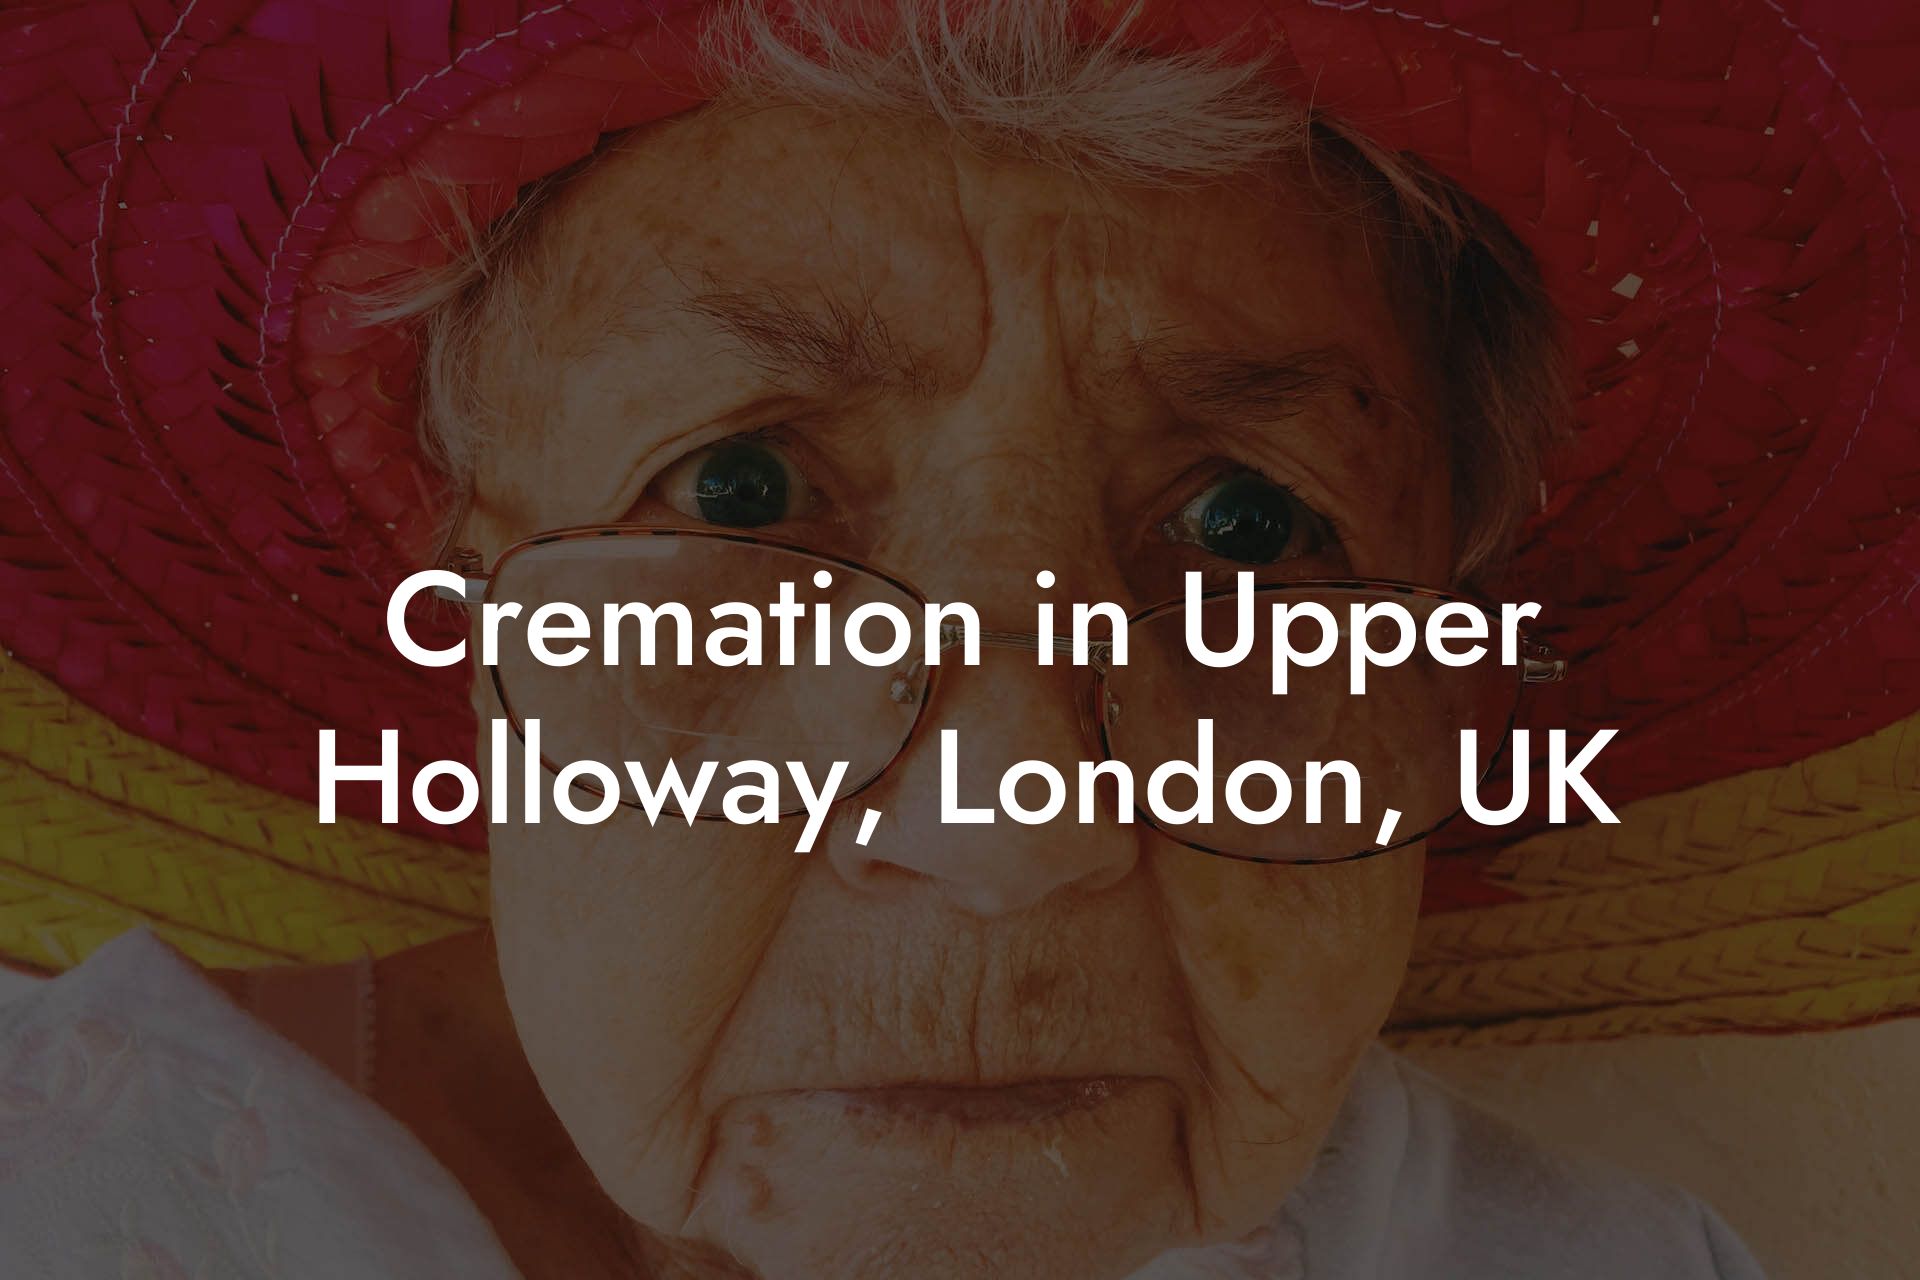 Cremation in Upper Holloway, London, UK